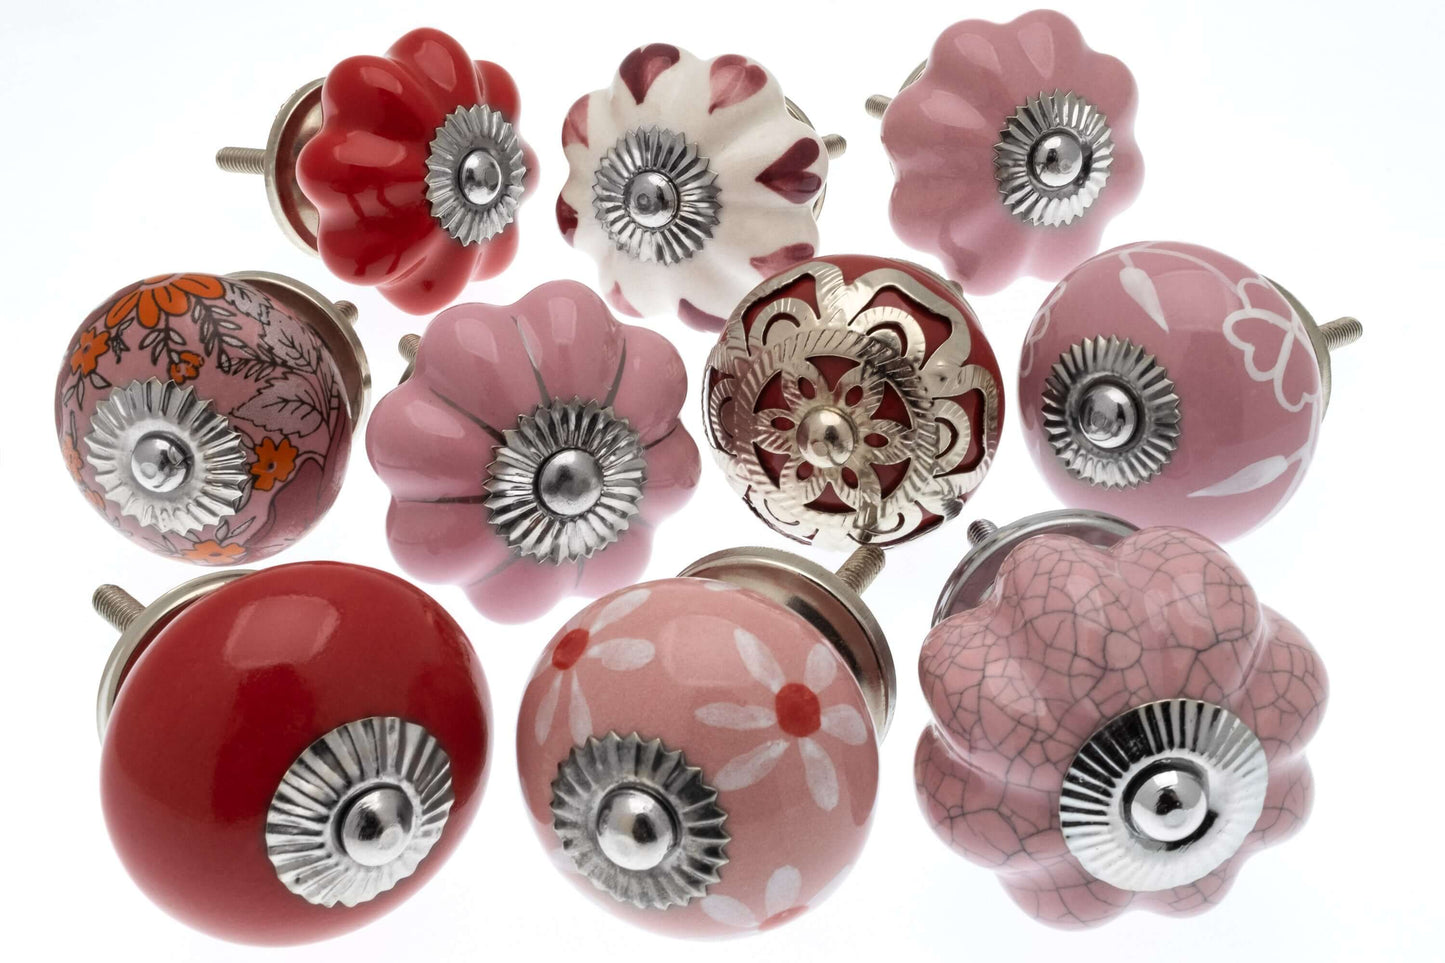 Ceramic Door Knobs - 10 Pretty Pink, Red Hearts and Daisies